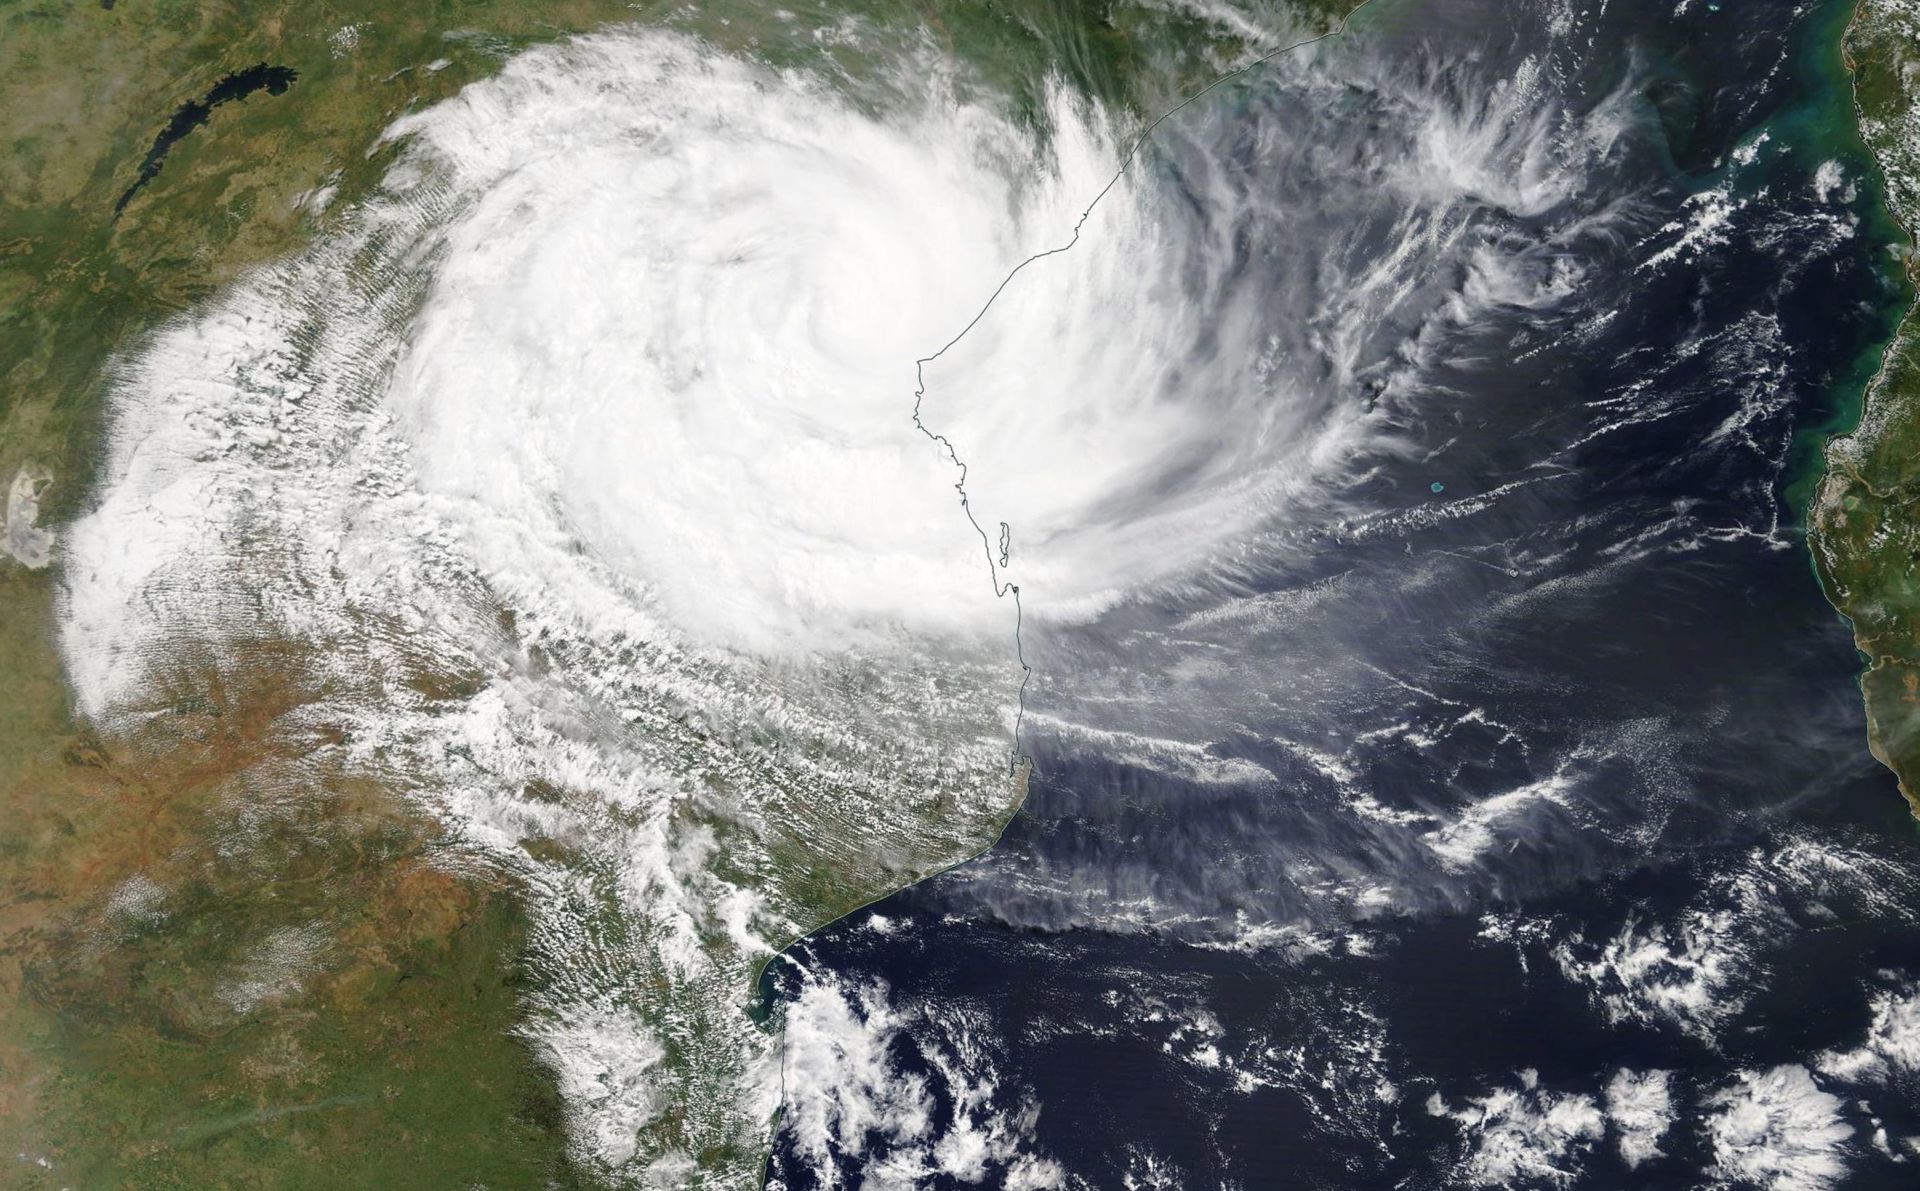 epa07439646 A handout photo made available by the NASA shows a Terra/MODIS satellite image of cyclone Idai as it hits Mozambique, 15 March 2019. Cyclone Idai made landfall in Mozambique.  EPA/NASA WORLDVIEW / HANDOUT  HANDOUT EDITORIAL USE ONLY/NO SALES